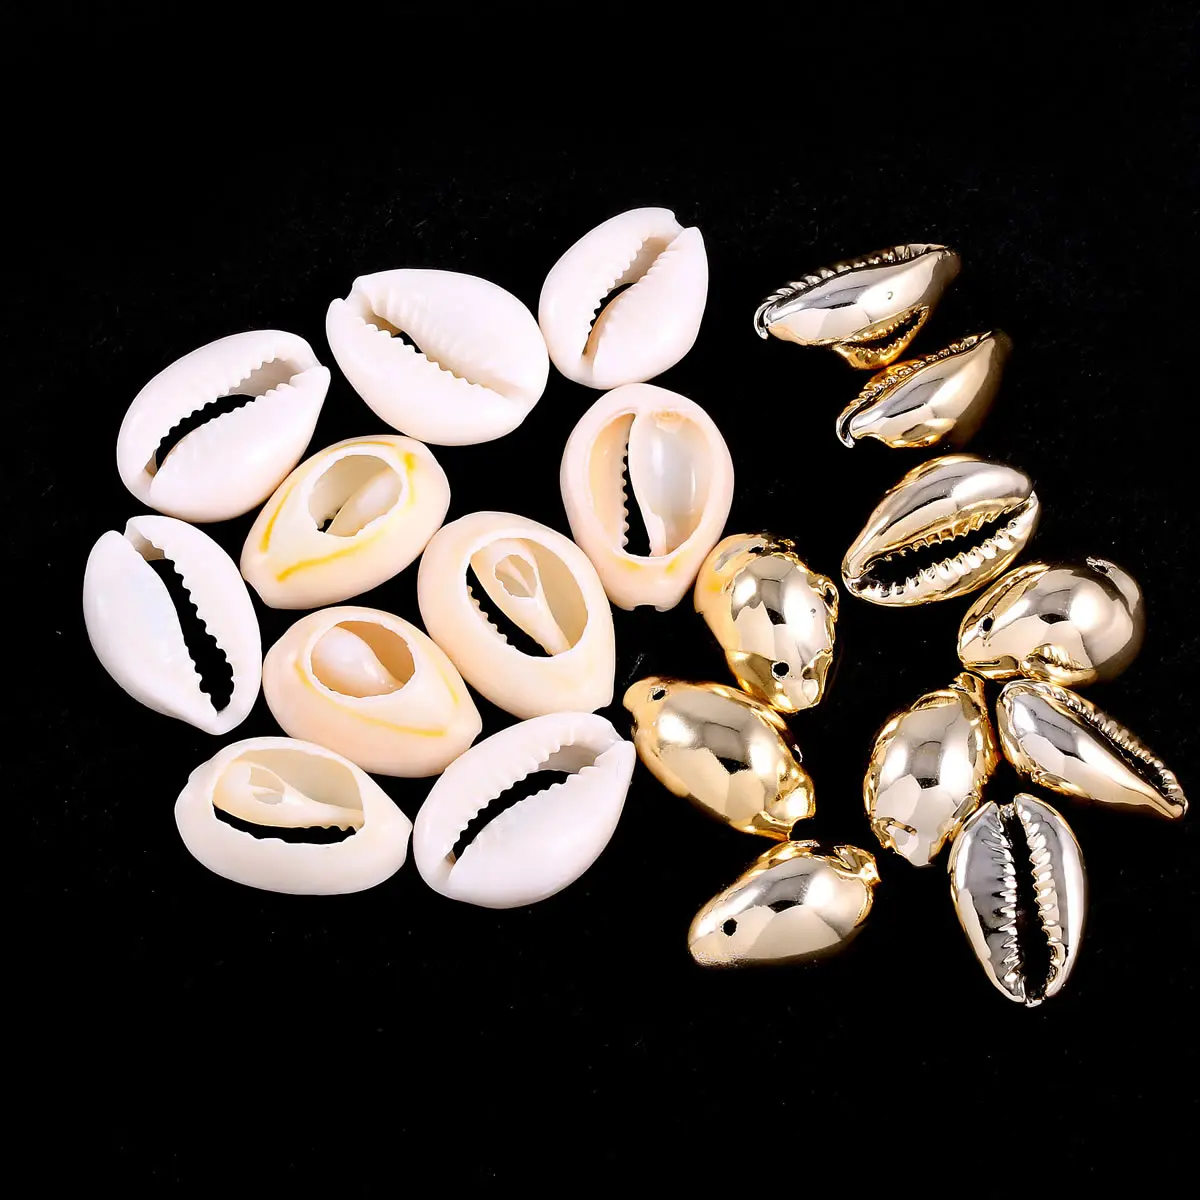 

10PC Natural Shells Pendant Bohemian Gold White Conch Shell Charms Pendants for Jewelry Making DIY Handmade Necklace Earrings